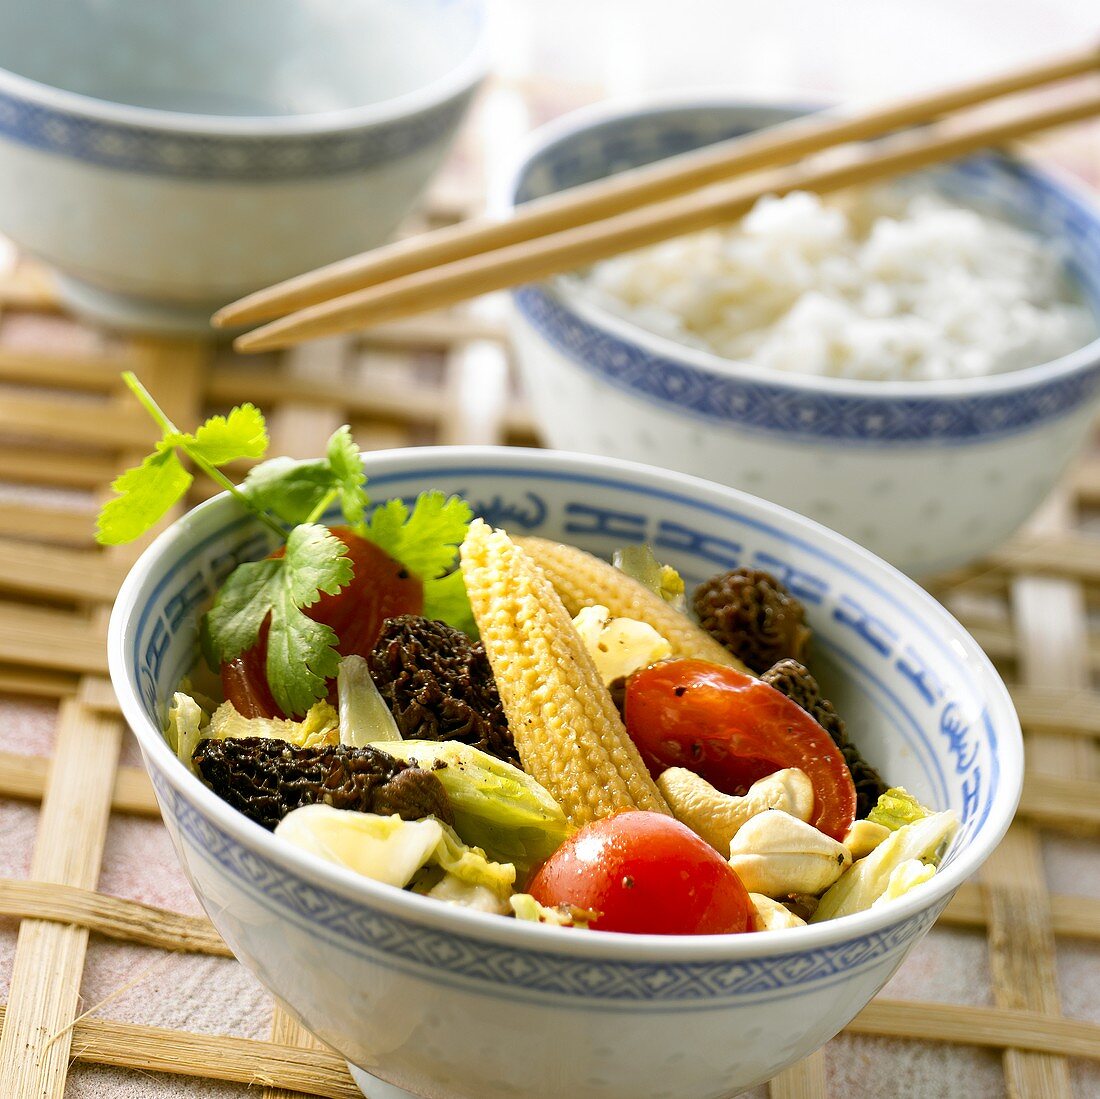 Wok-cooked vegetables in a small bowl (China)